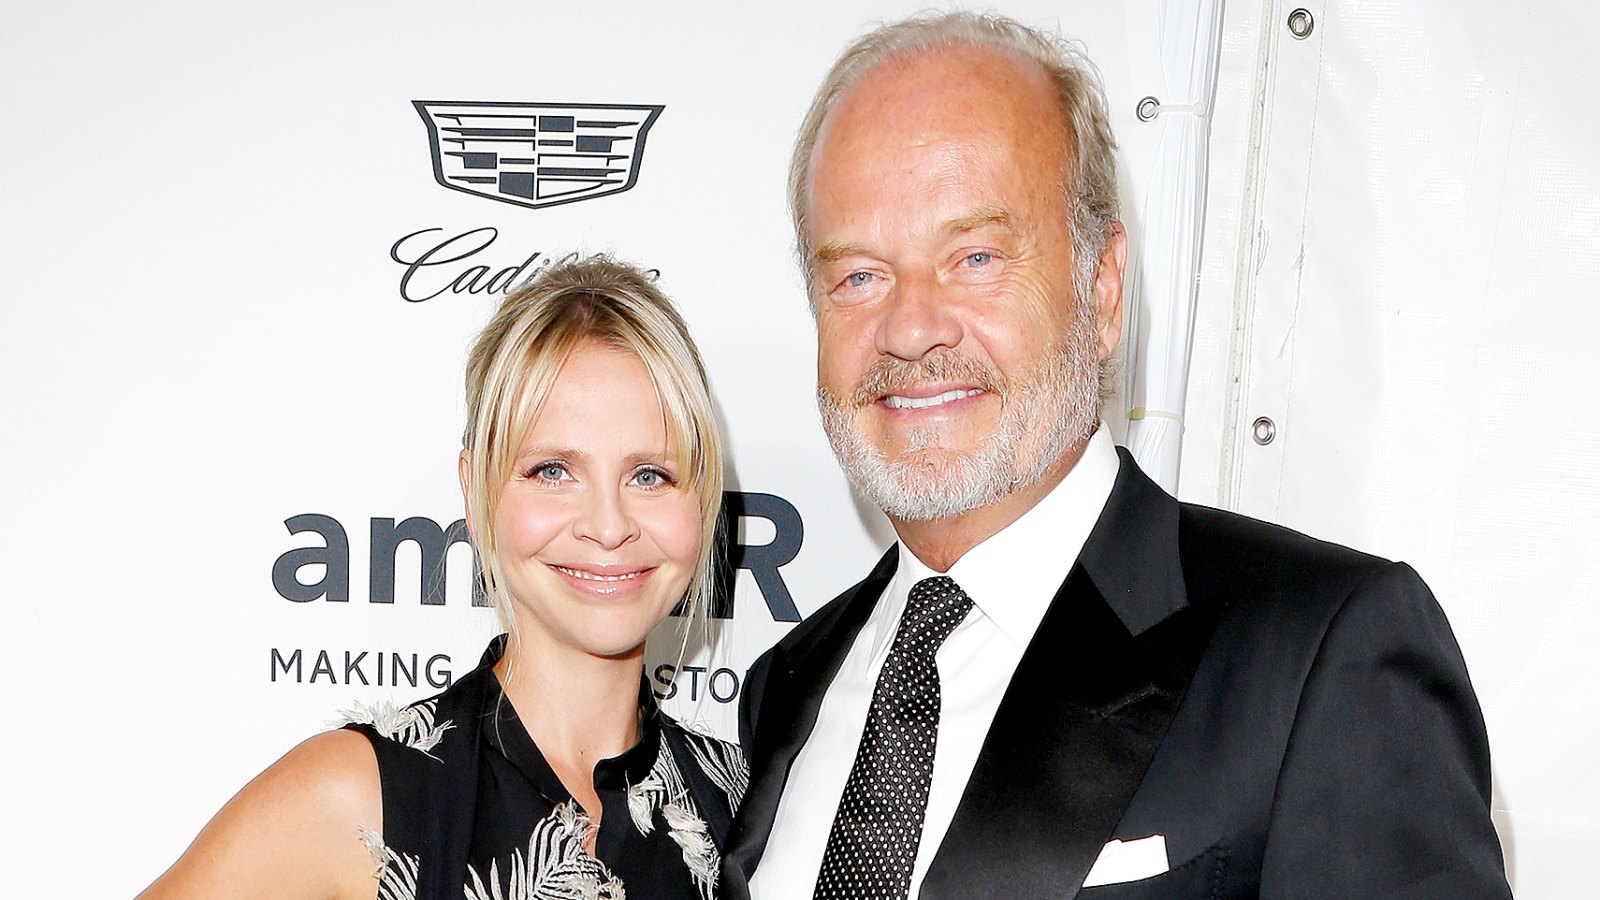 Kelsey Grammer and Kayte Walsh attend amfAR's Inspiration Gala Los Angeles at Milk Studios on October 27, 2016 in Hollywood, California.